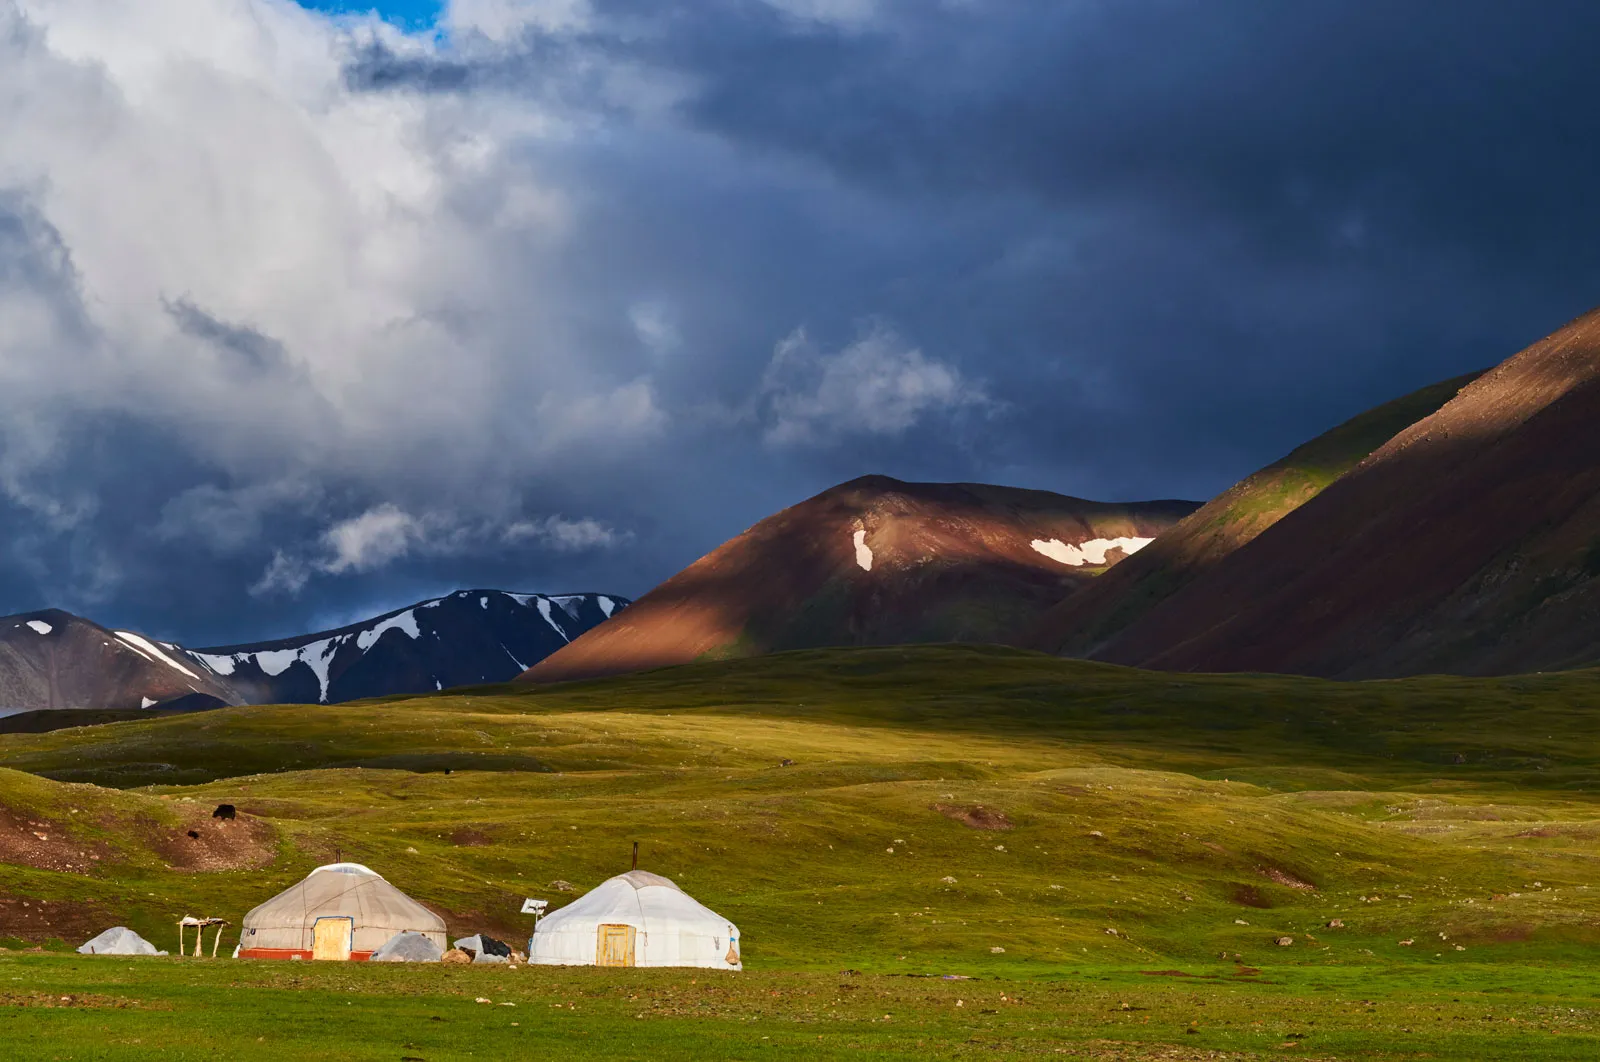 Best time to visit Mongolia